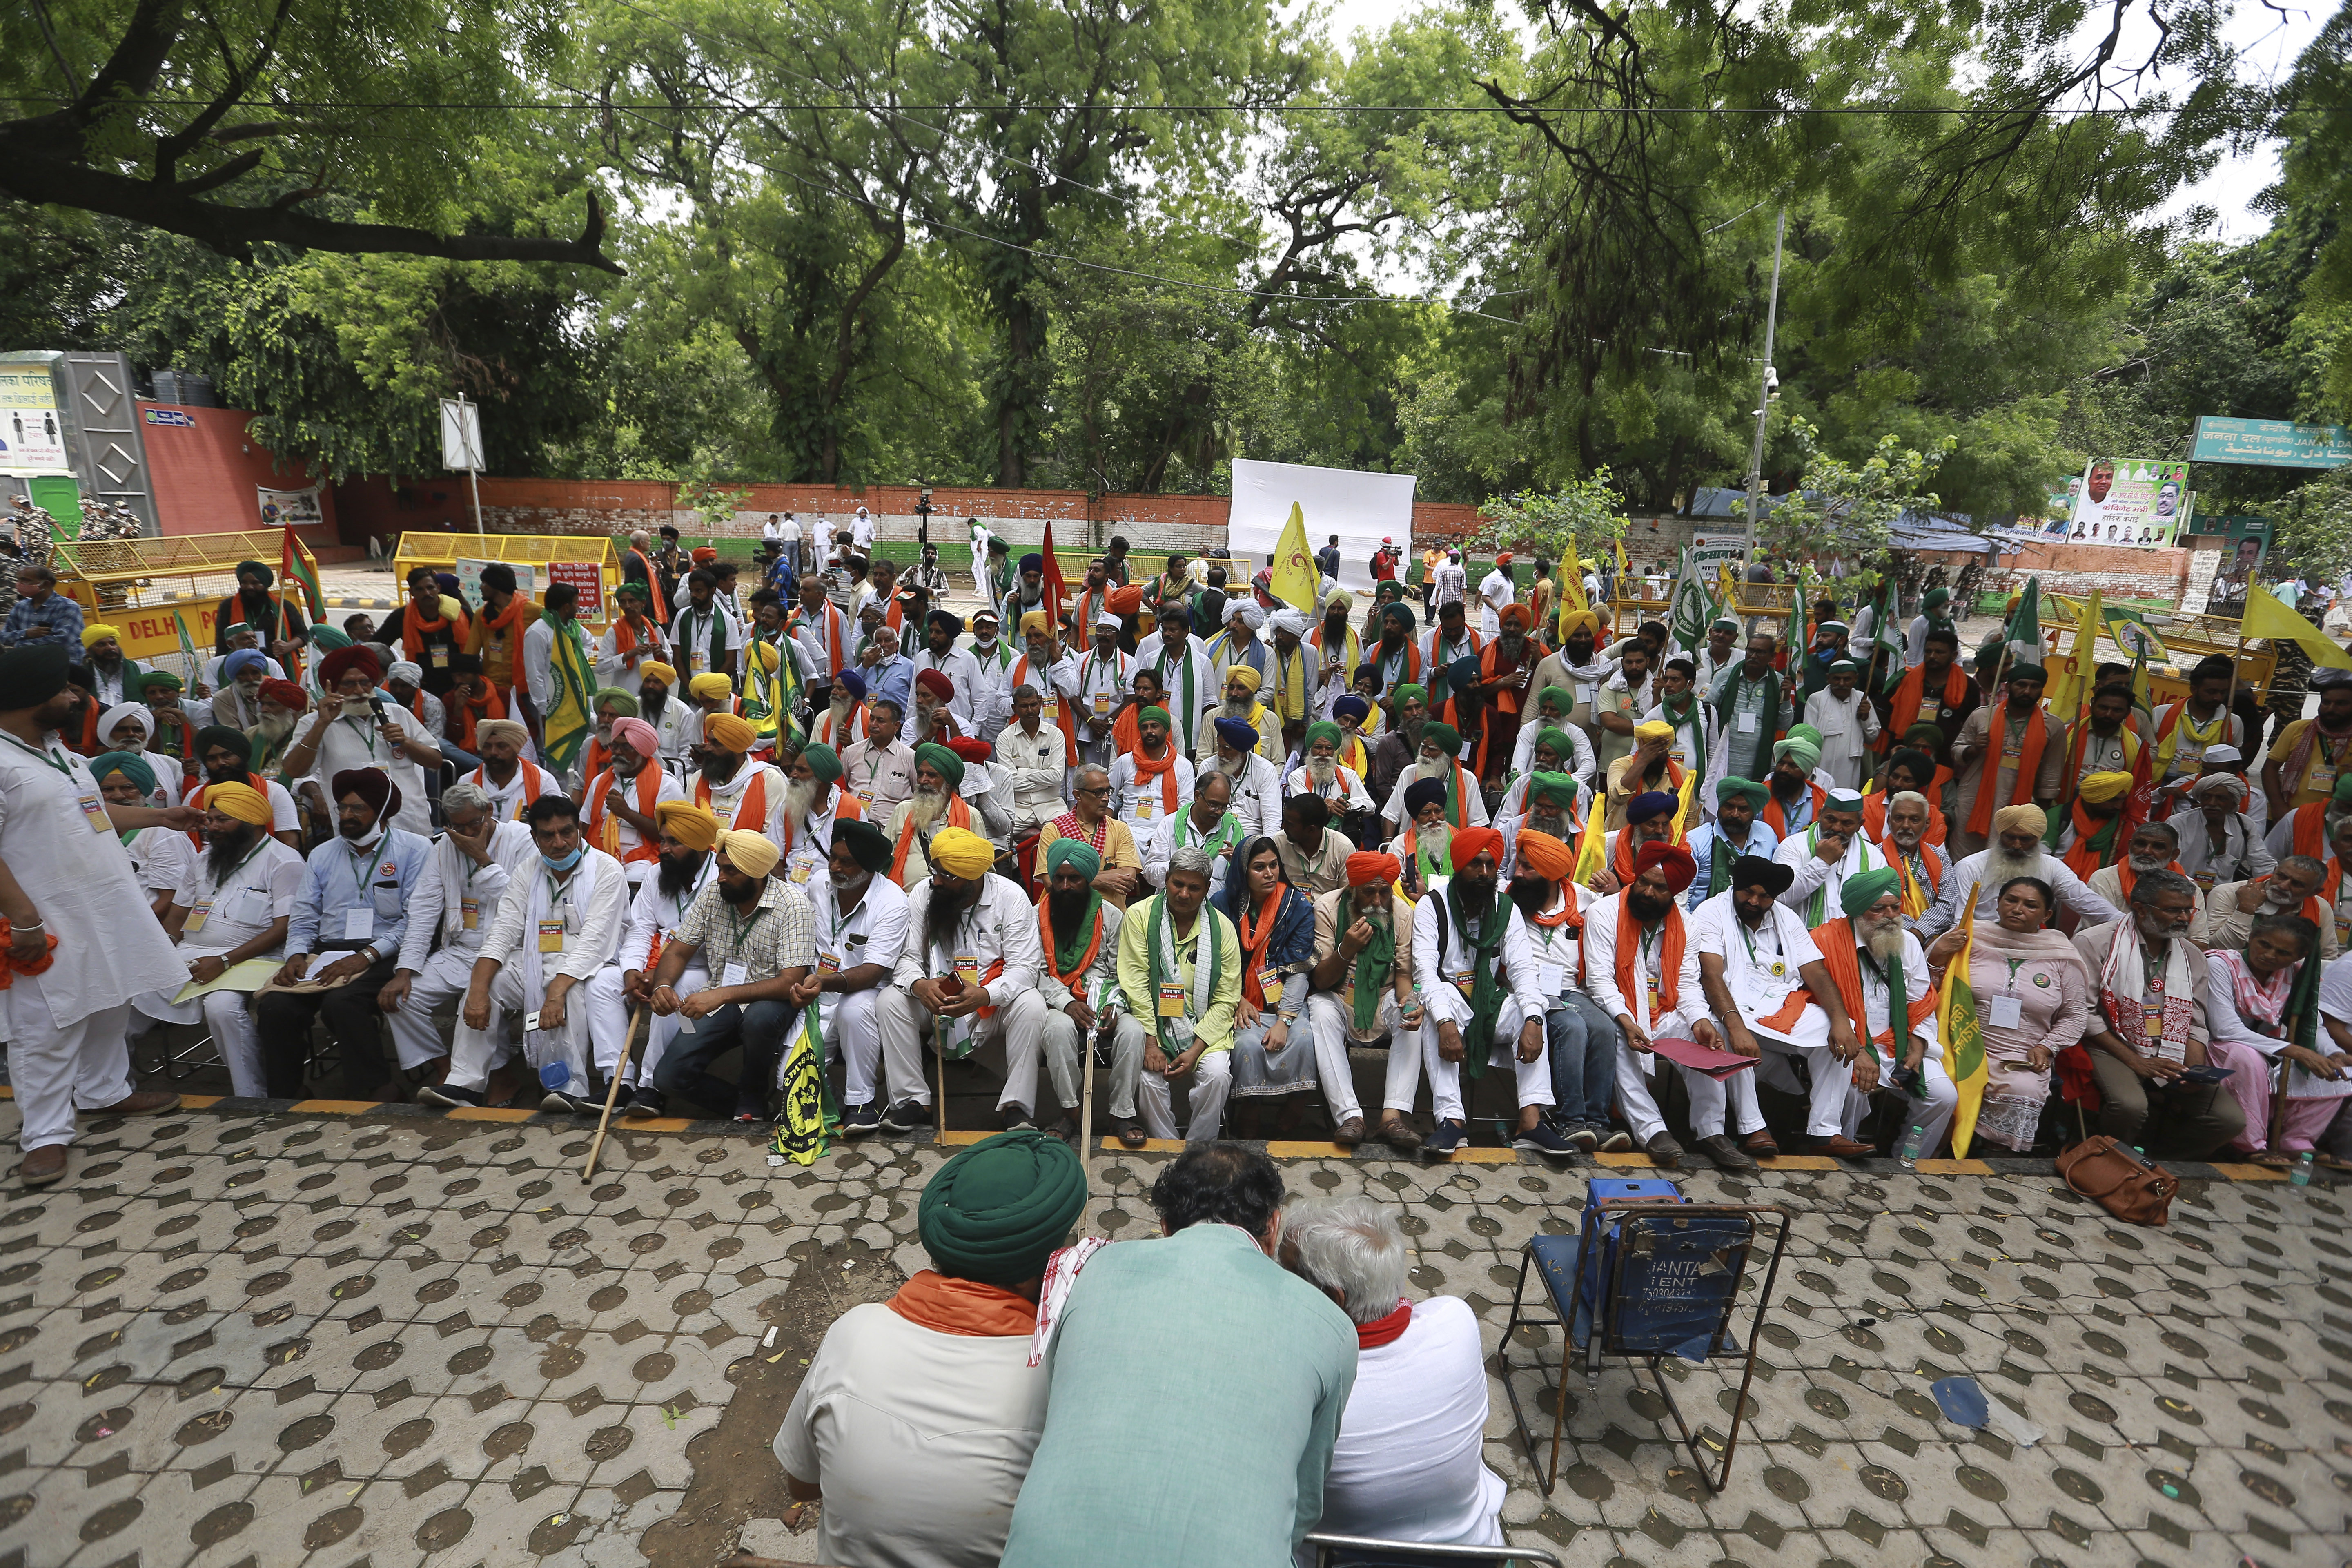 Indian farmers hold a mock parliament as a mark of protest, in New Delhi, India, Thursday, July 22, 2021. More than 200 farmers on Thursday began a protest near India's Parliament to mark eight months of their agitation against new agricultural laws that they say will devastate their income. (AP Photo)